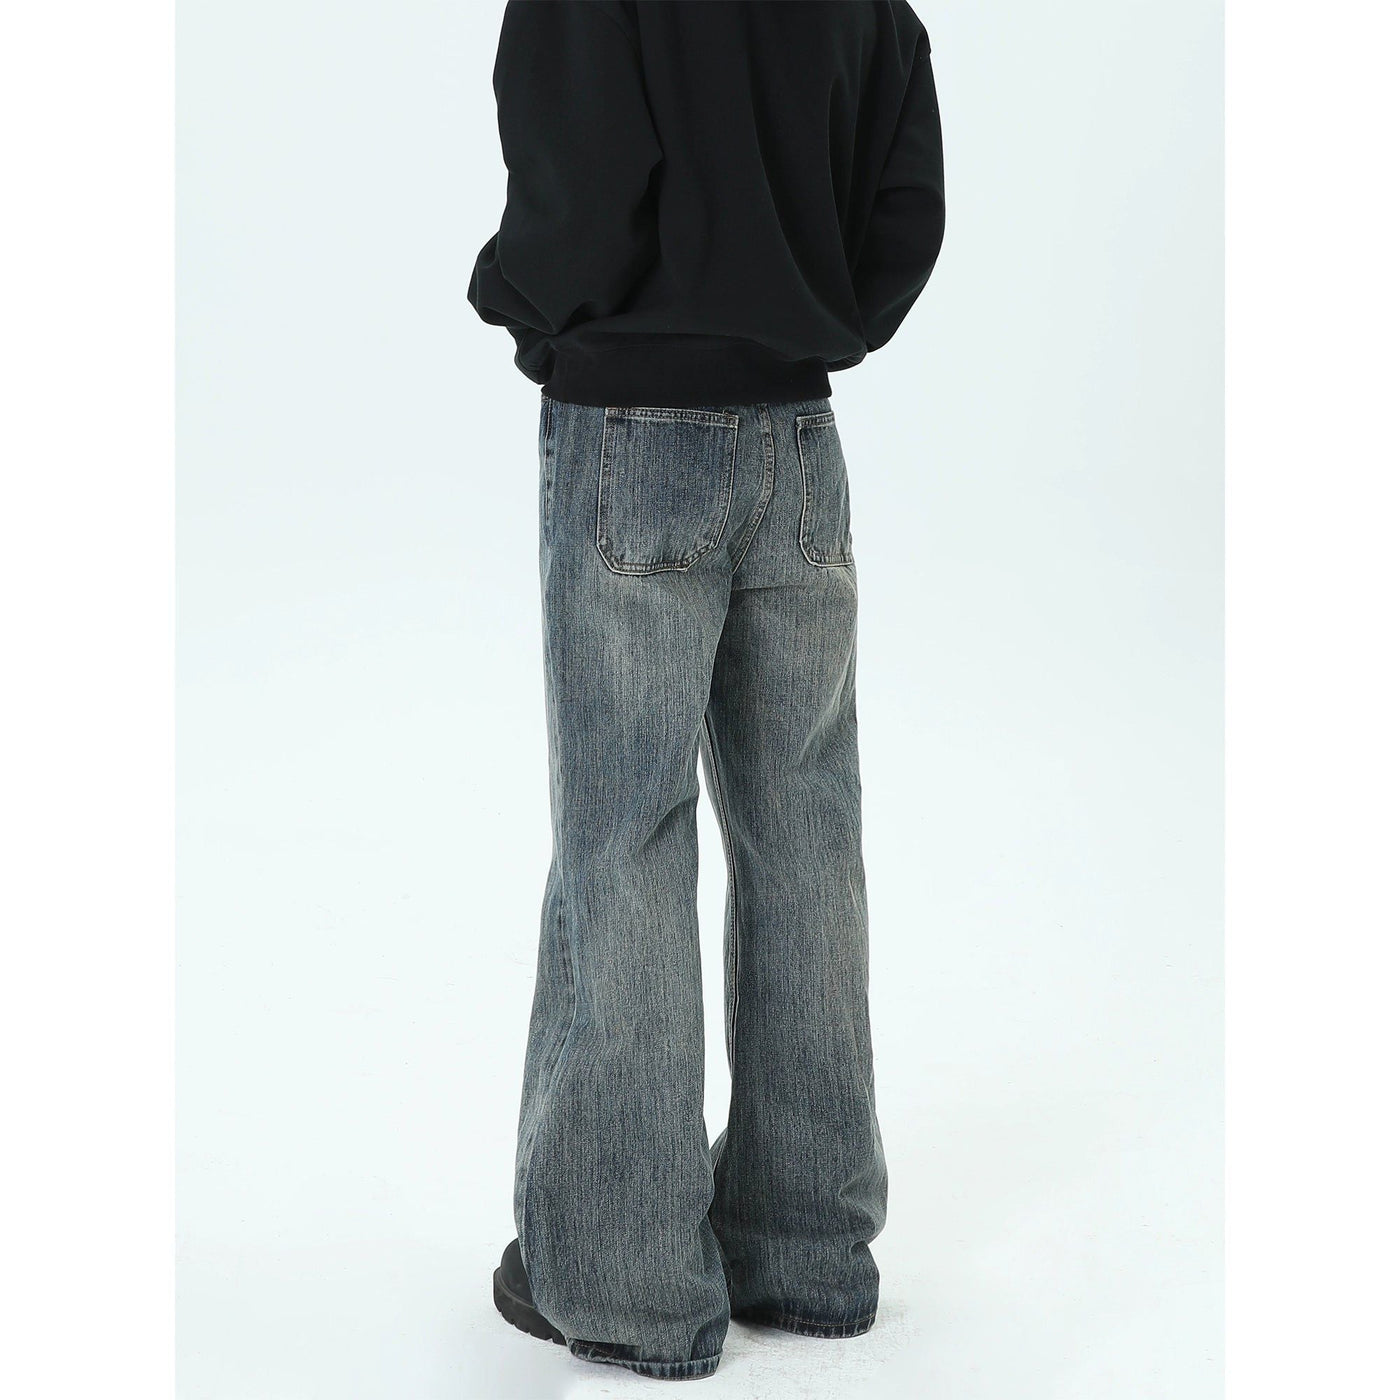 Bamboo Pattern Flare Leg Jeans Korean Street Fashion Jeans By MaxDstr Shop Online at OH Vault